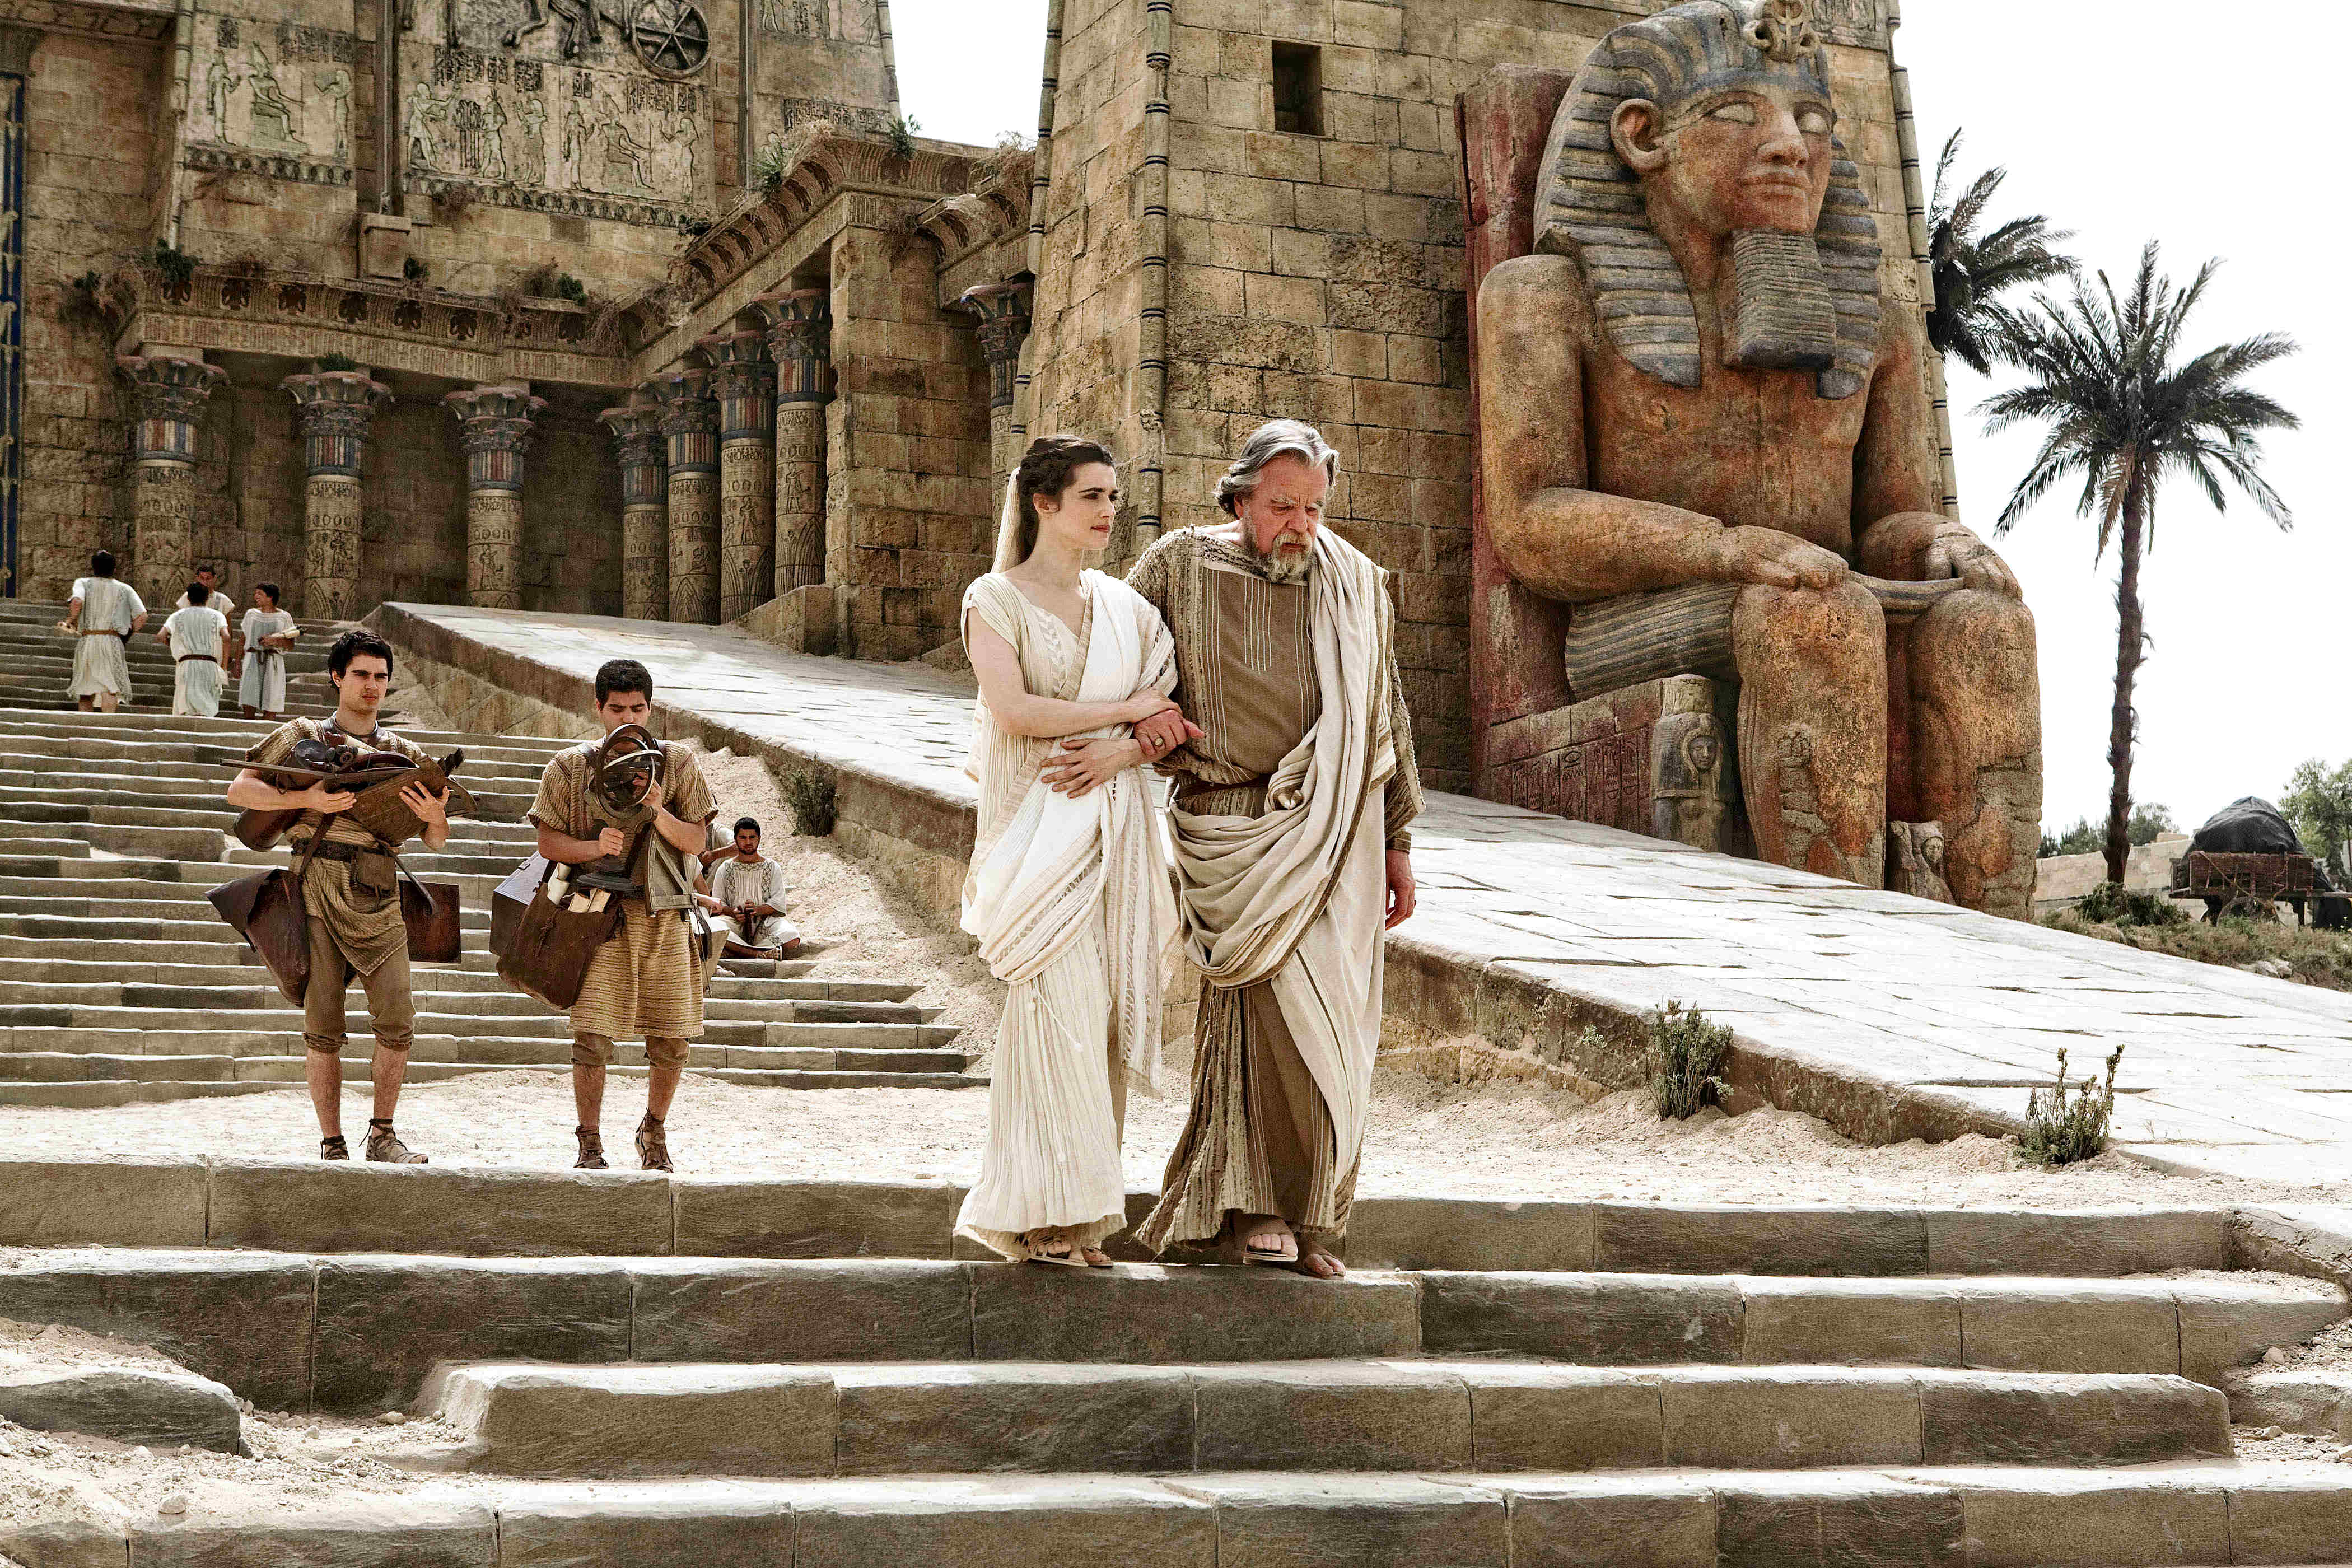 Rachel Weisz as Hypatia and Michael Lonsdale as Theon in 'Agora' (2009)